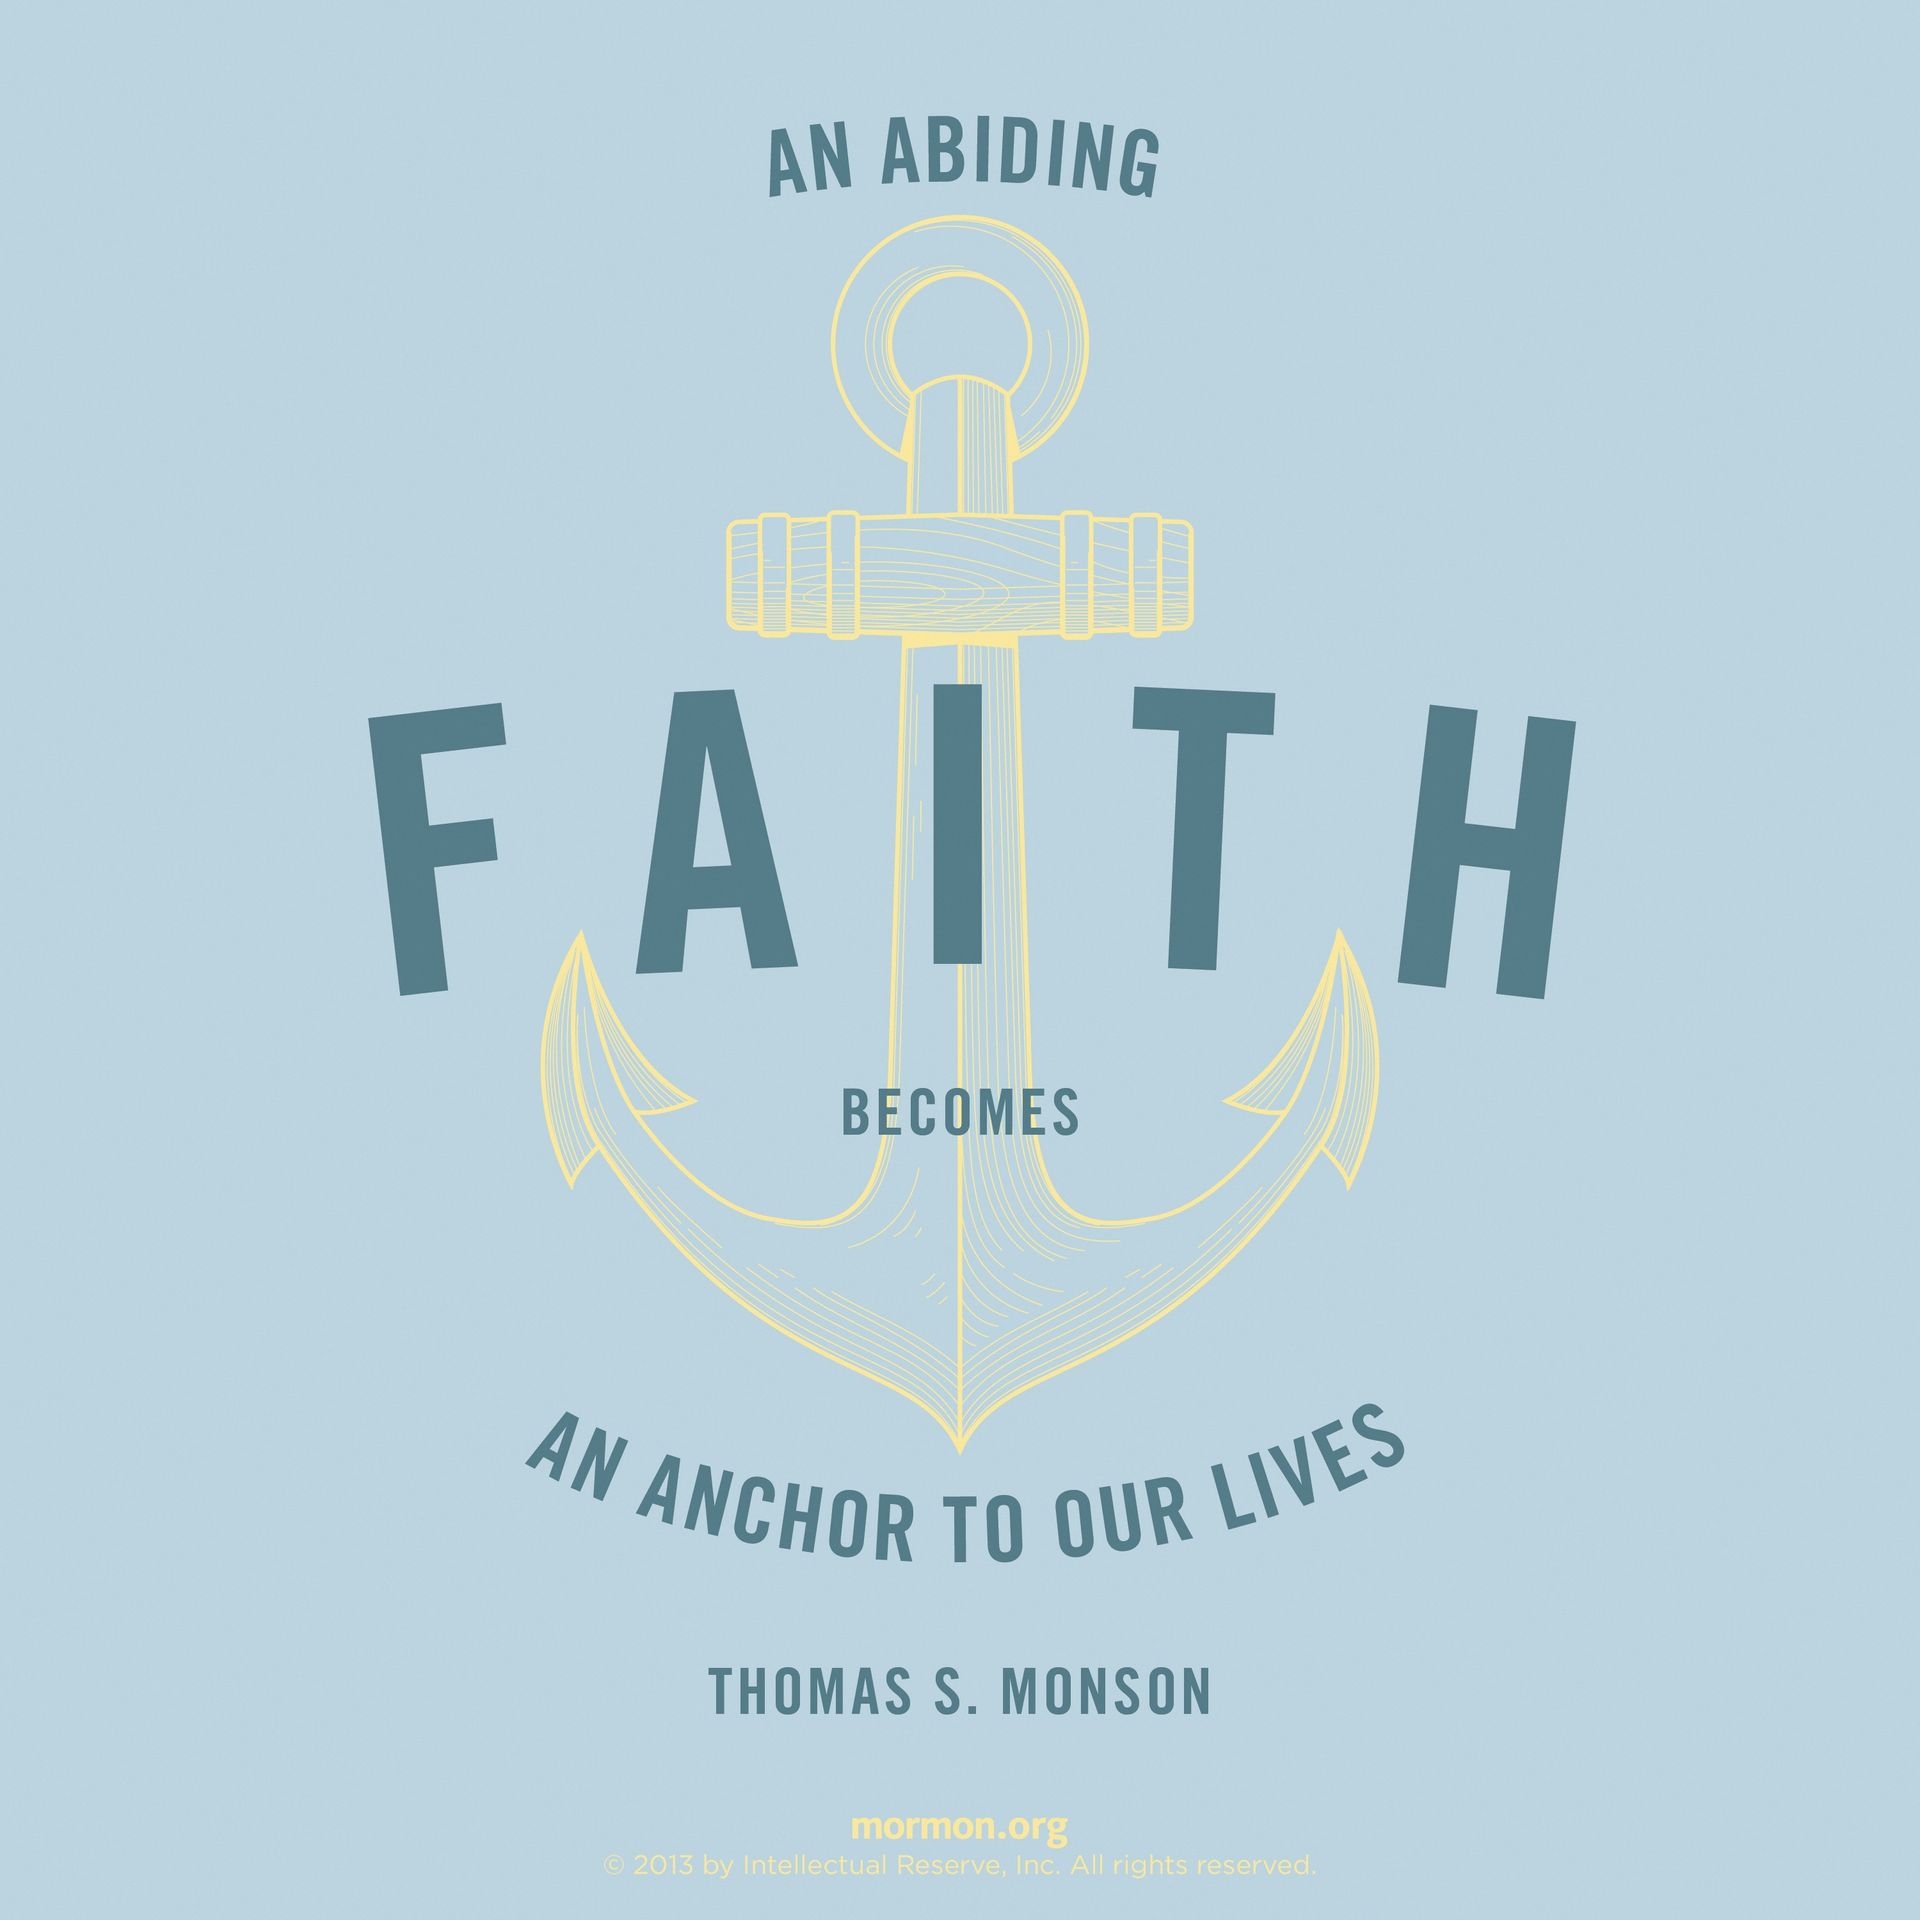 “An abiding faith becomes an anchor to our lives.”—President Thomas S. Monson, “The Lighthouse of the Lord: A Message to the Youth of the Church”